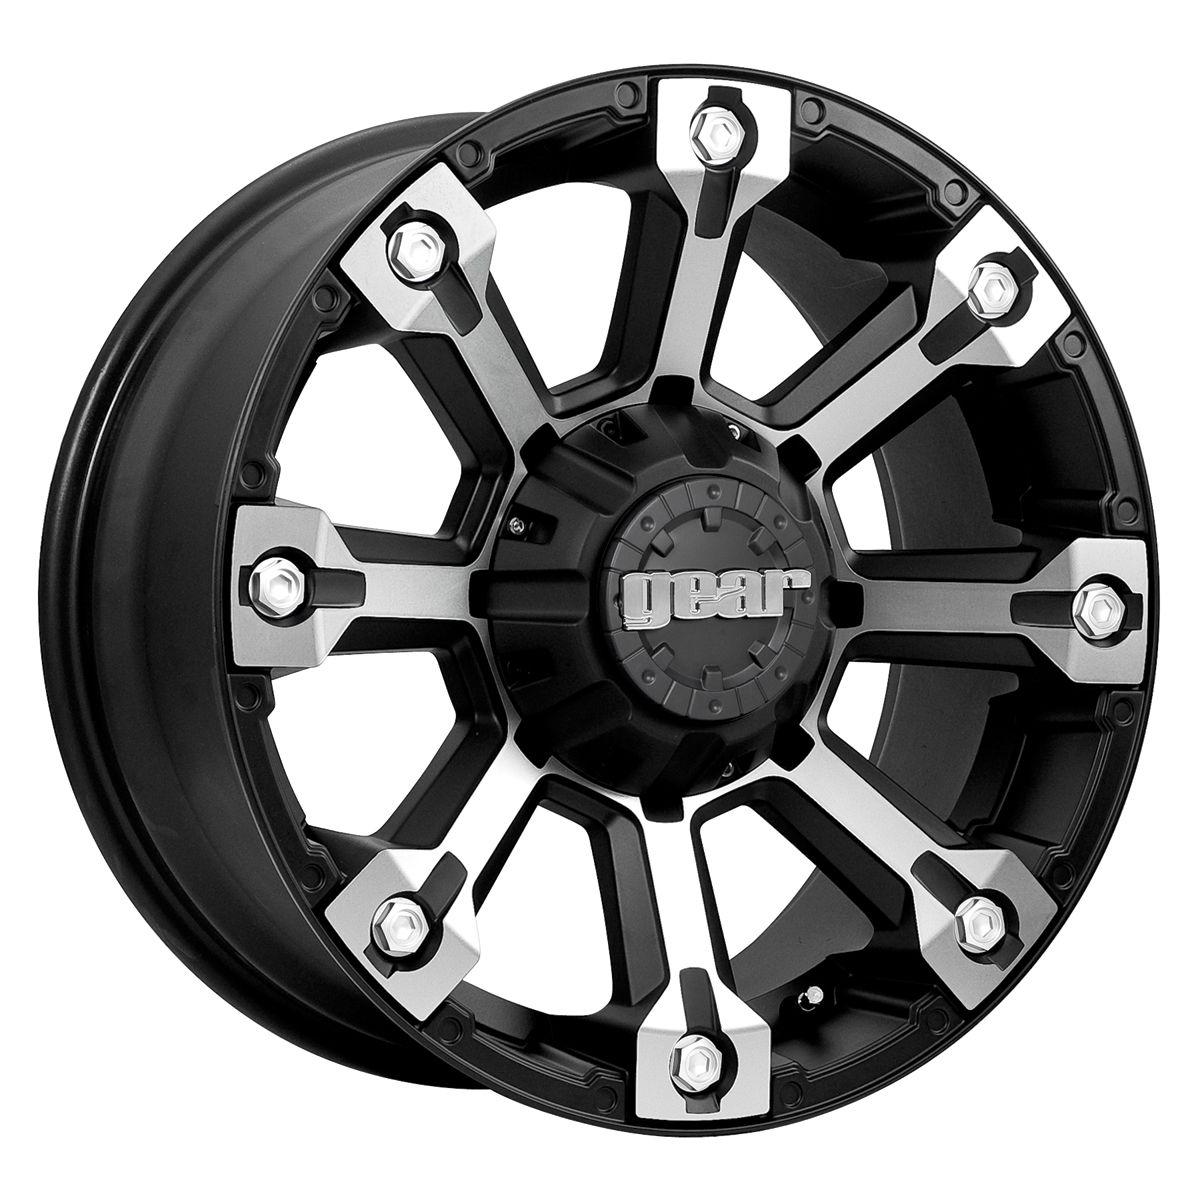 719MB Backcountry 18X9 (6-135) Machined w/ Carbon Black Accents